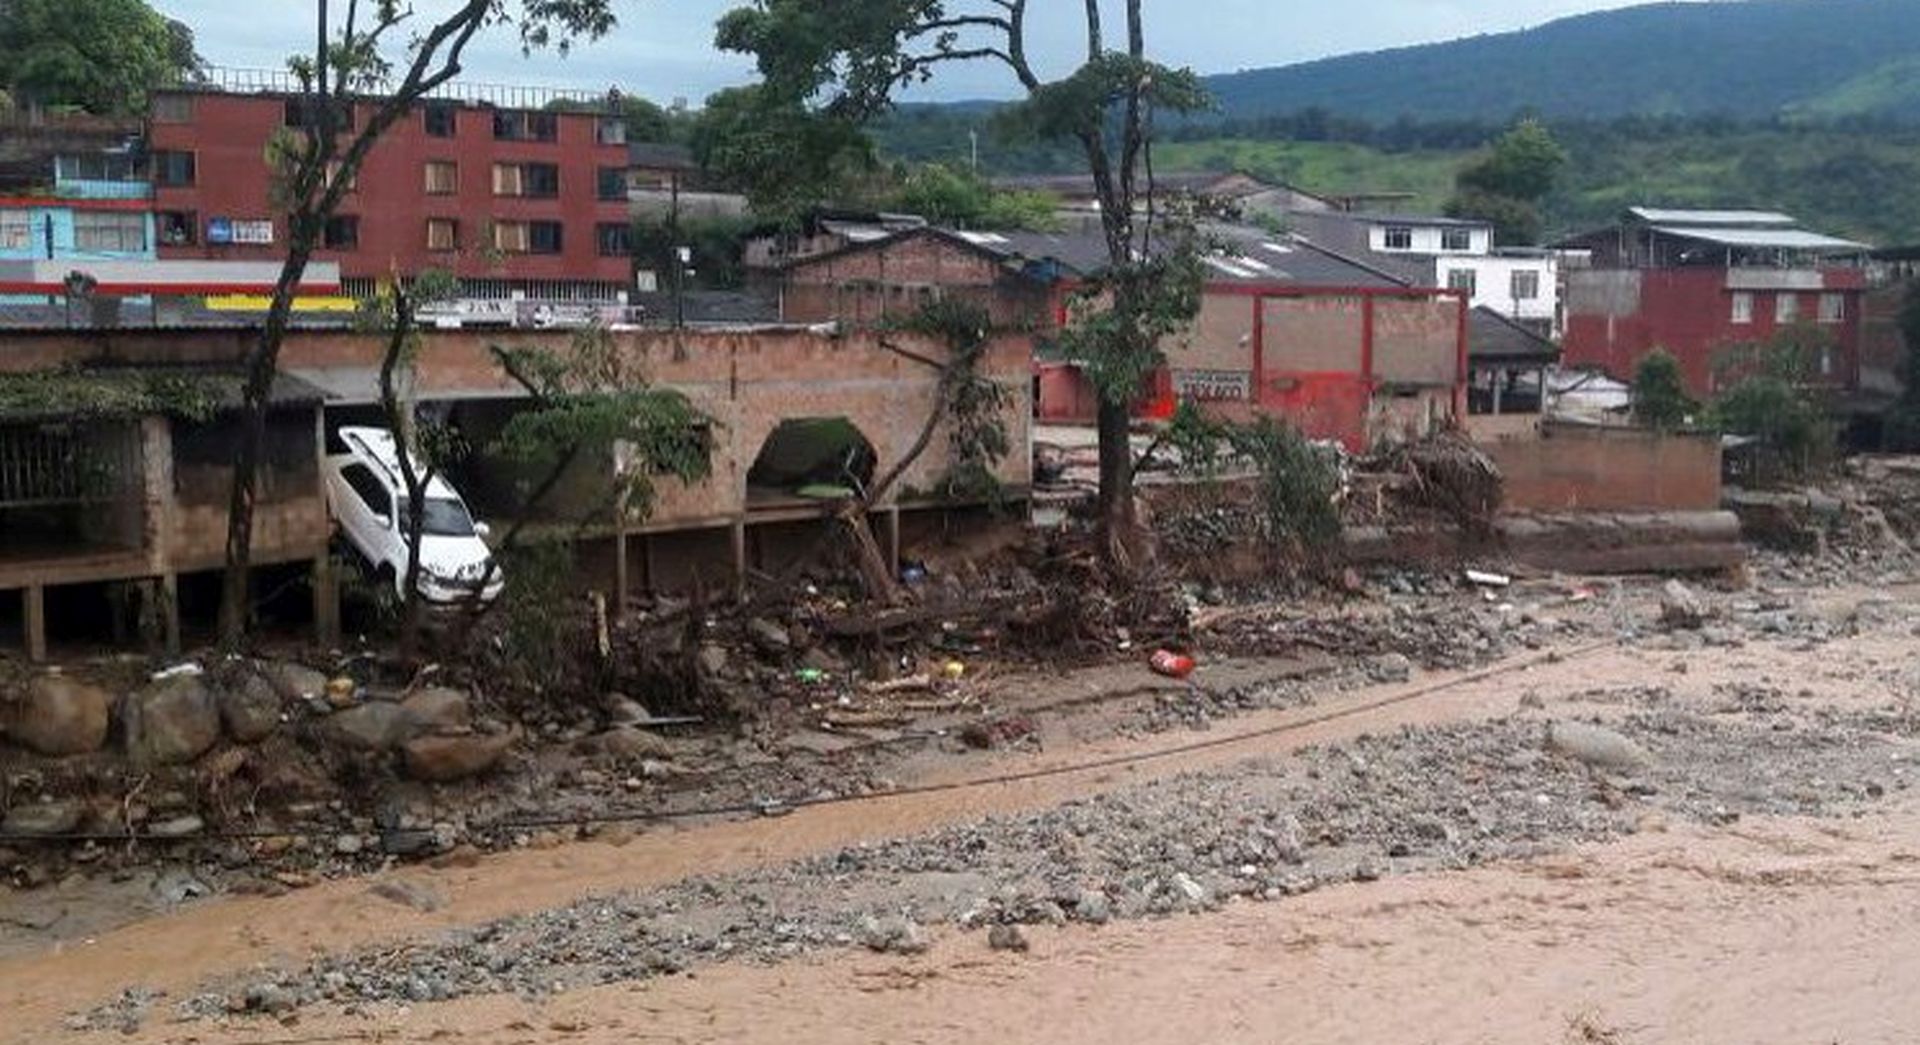 epa05883403 A handout picture provided by the Colombian Army shows the damages caused by a landslide in Mocoa, Colombia, 01 April 2017. At least 154 people died, 400 were injured and 200 are still missing after the landslide caused by the flood of three rivers that devastated several districts of the Colombian city of Mocoa, capital of the department of Putumayo in the south of the country, confirmed official sources today.  EPA/COLOMBIAN ARMY / HANDOUT  HANDOUT EDITORIAL USE ONLY/NO SALES